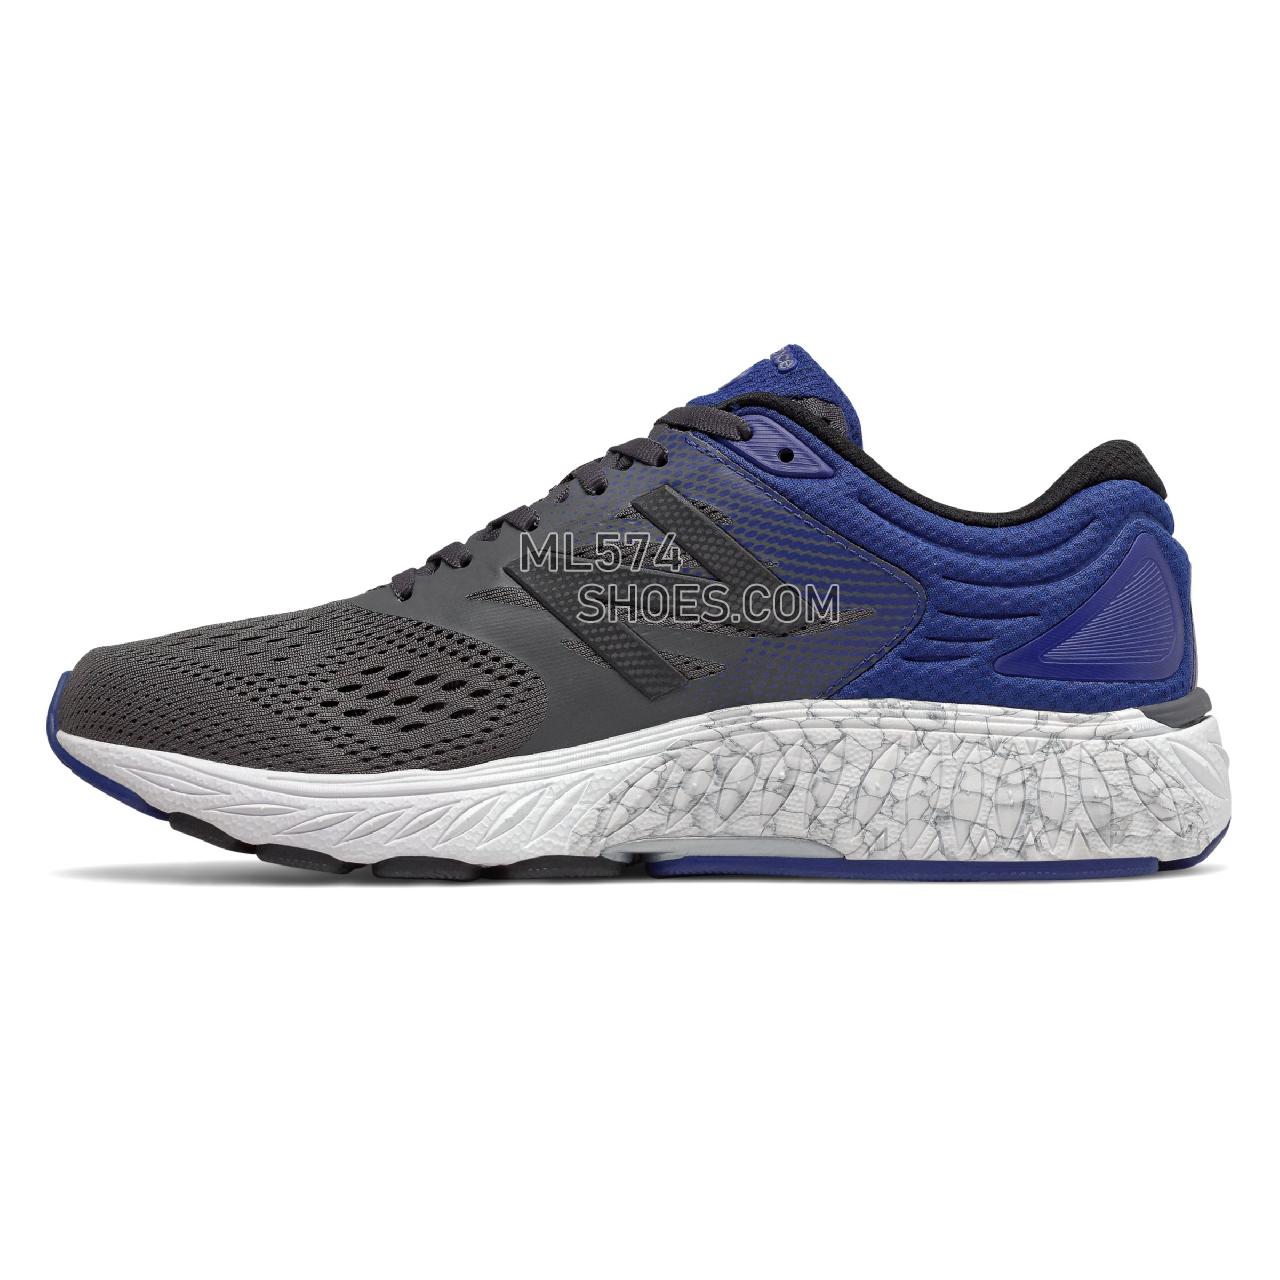 New Balance 940v4 - Men's Stability Running - Magnet with Marine Blue - M940GB4